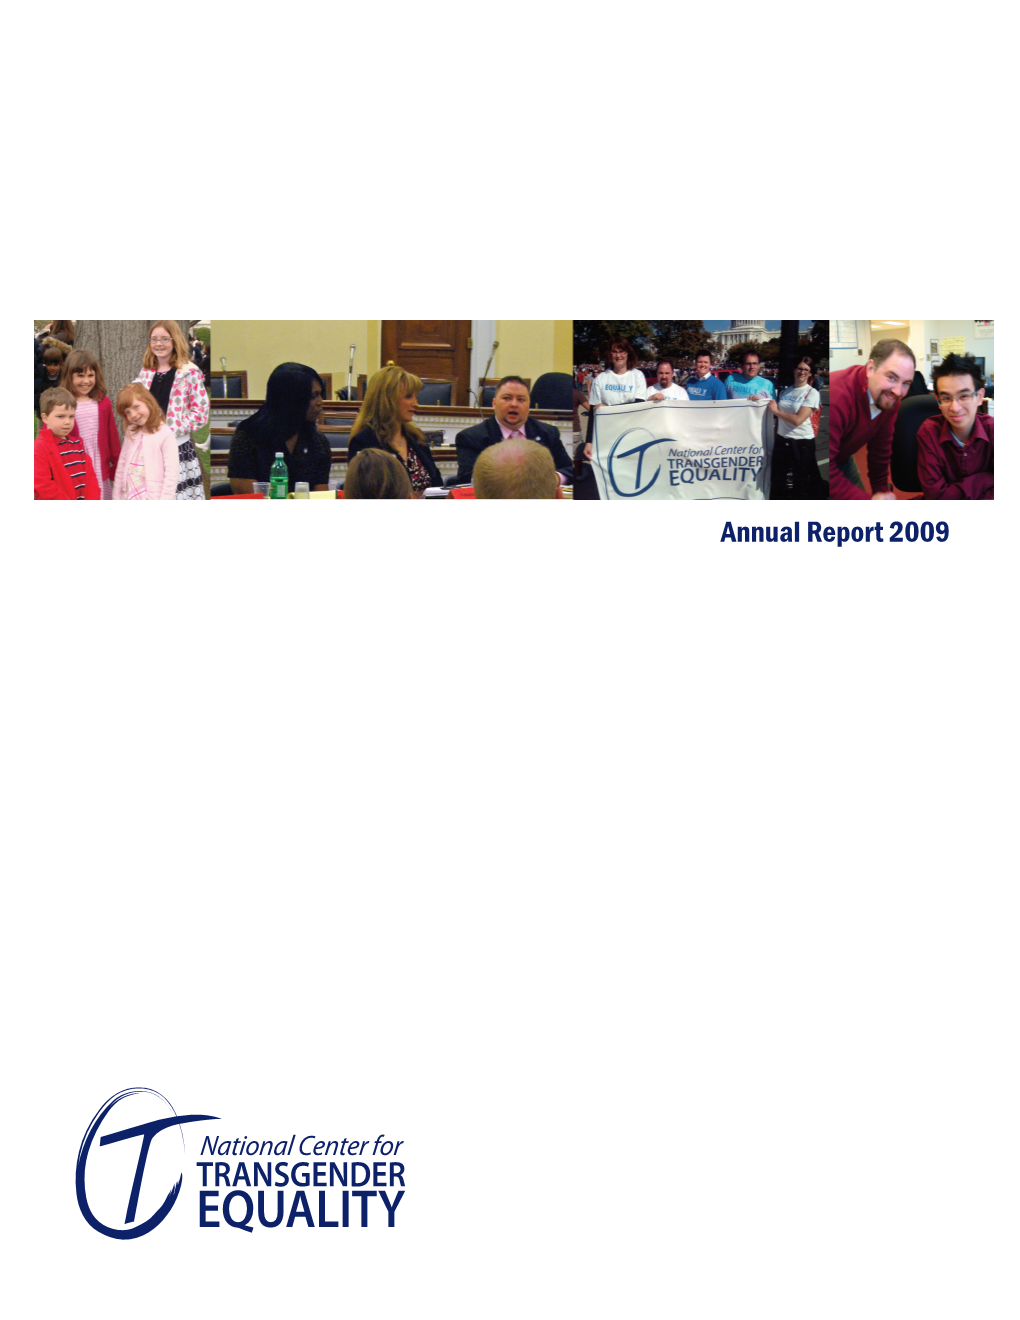 Annual Report 2009 on the Front Cover